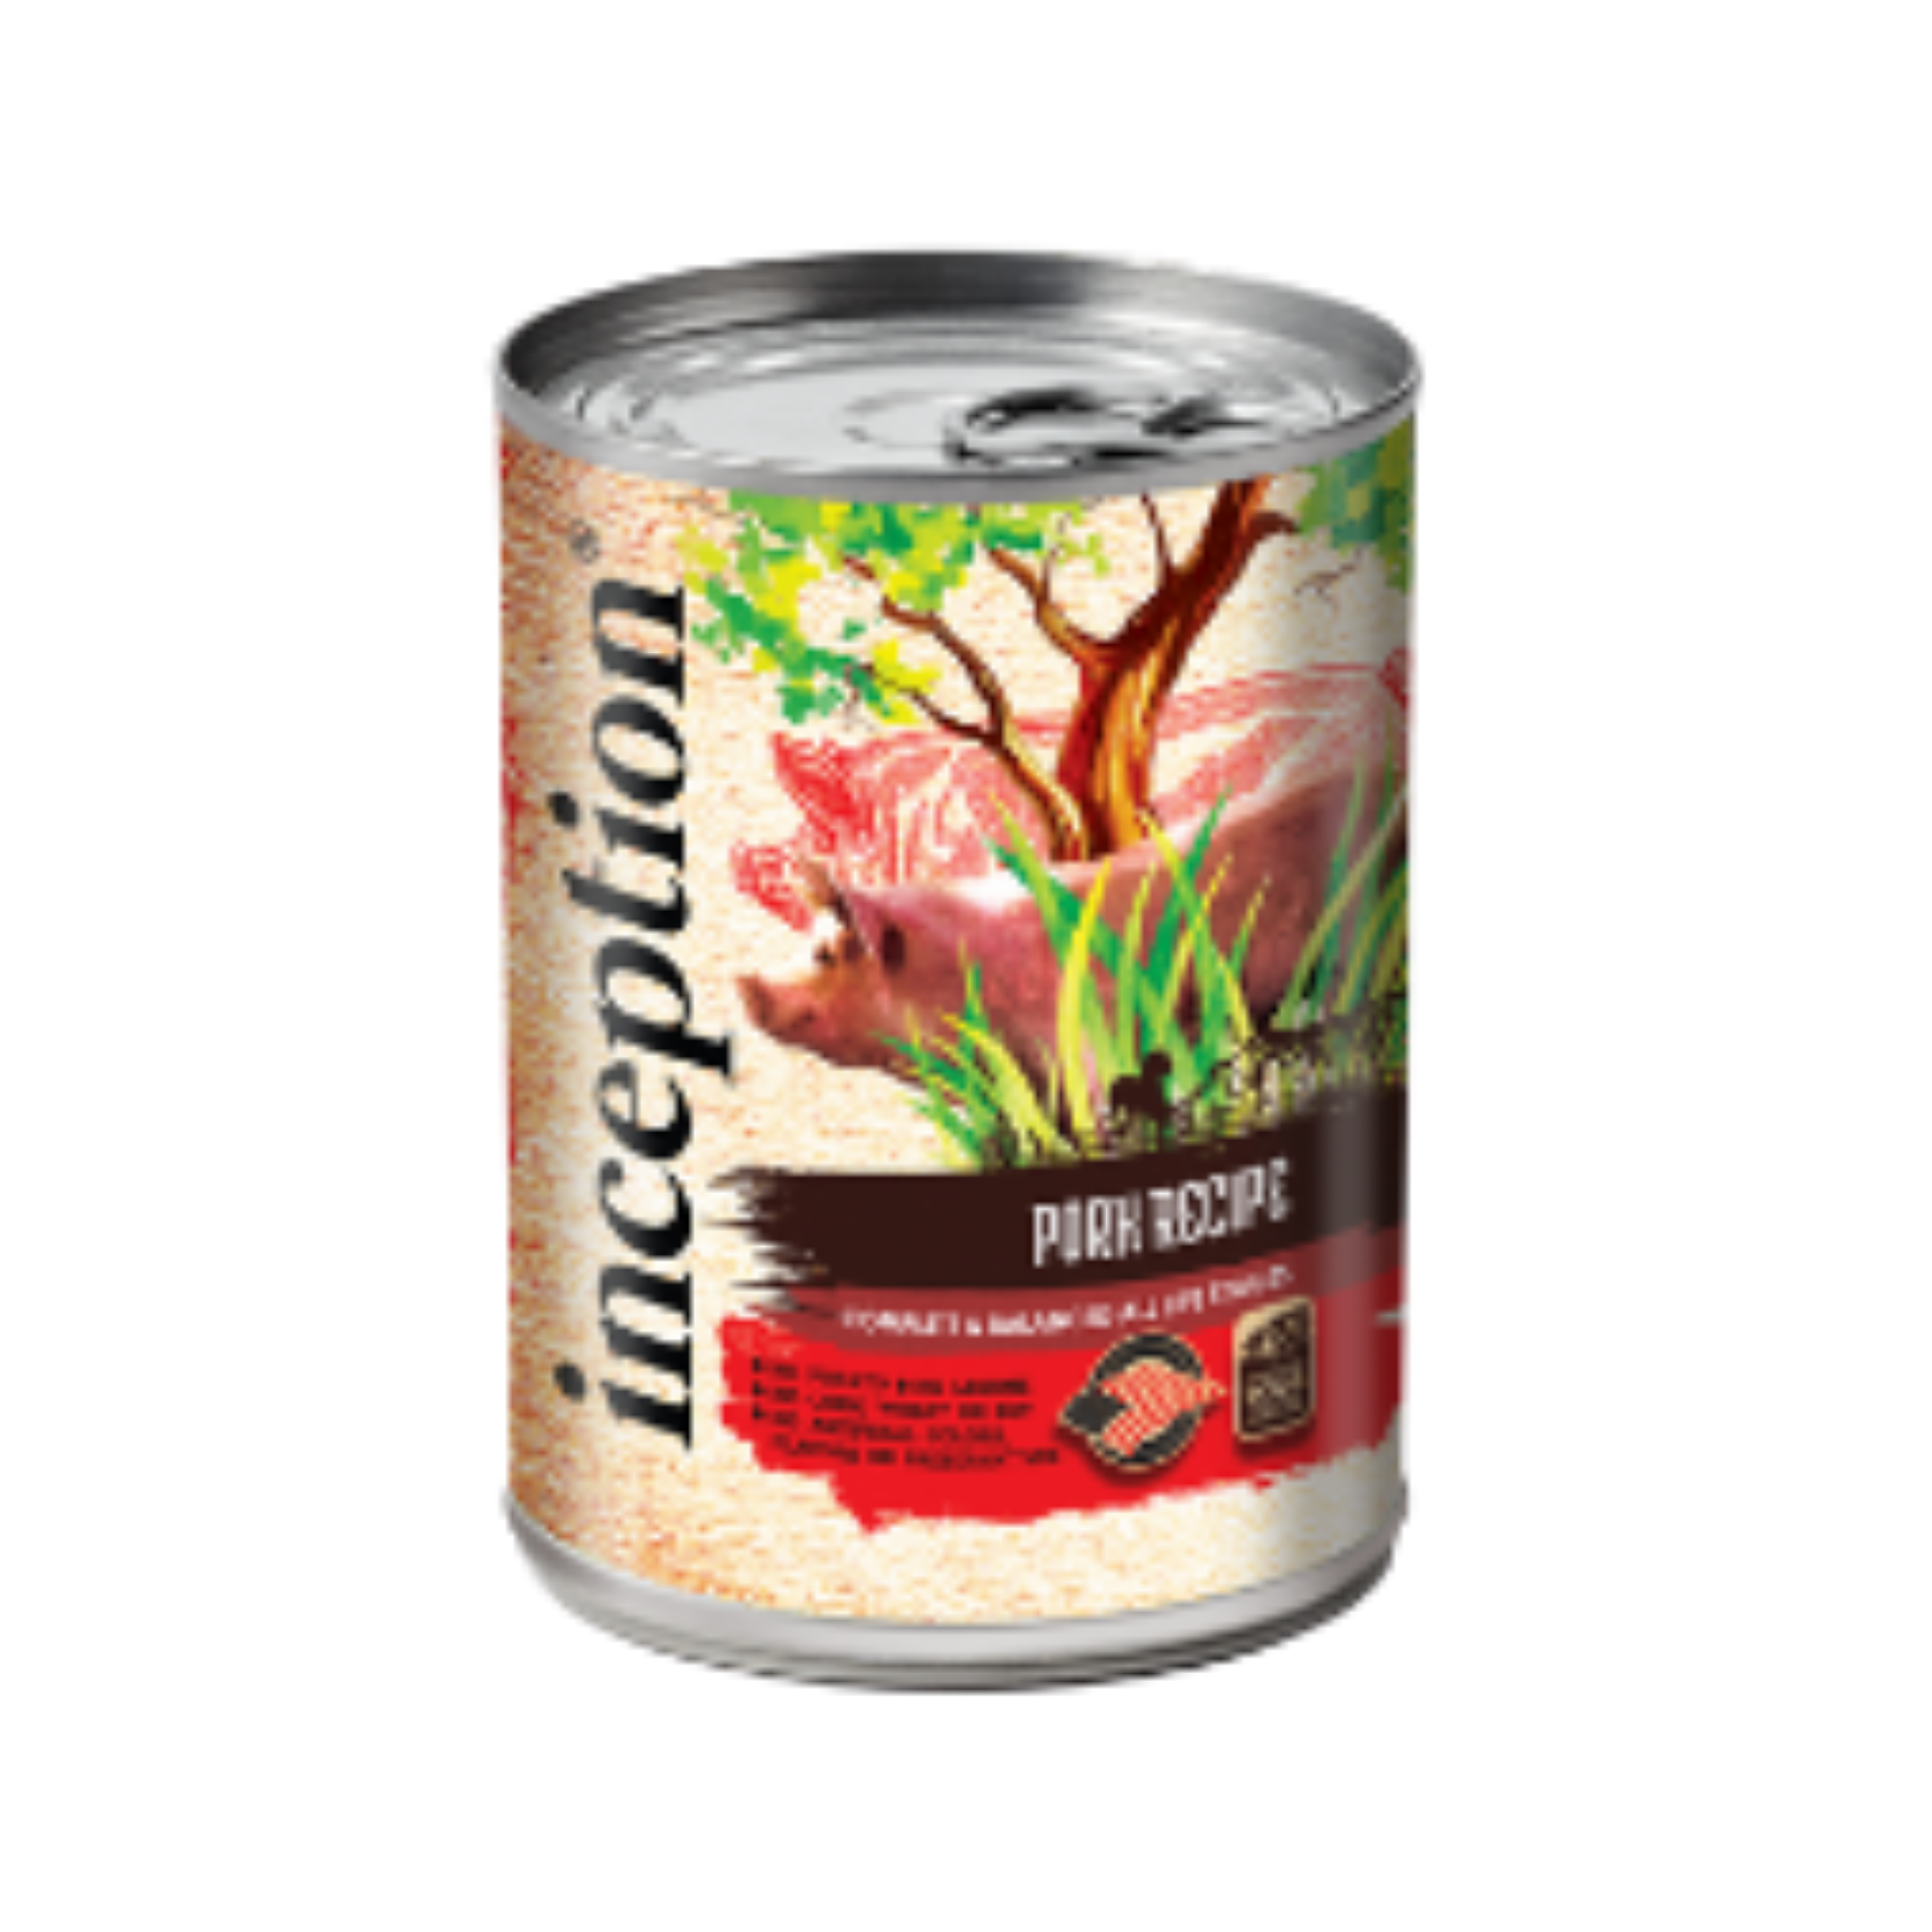 Inception Pork Recipe Canned Dog Food 13oz - Mutts & Co.